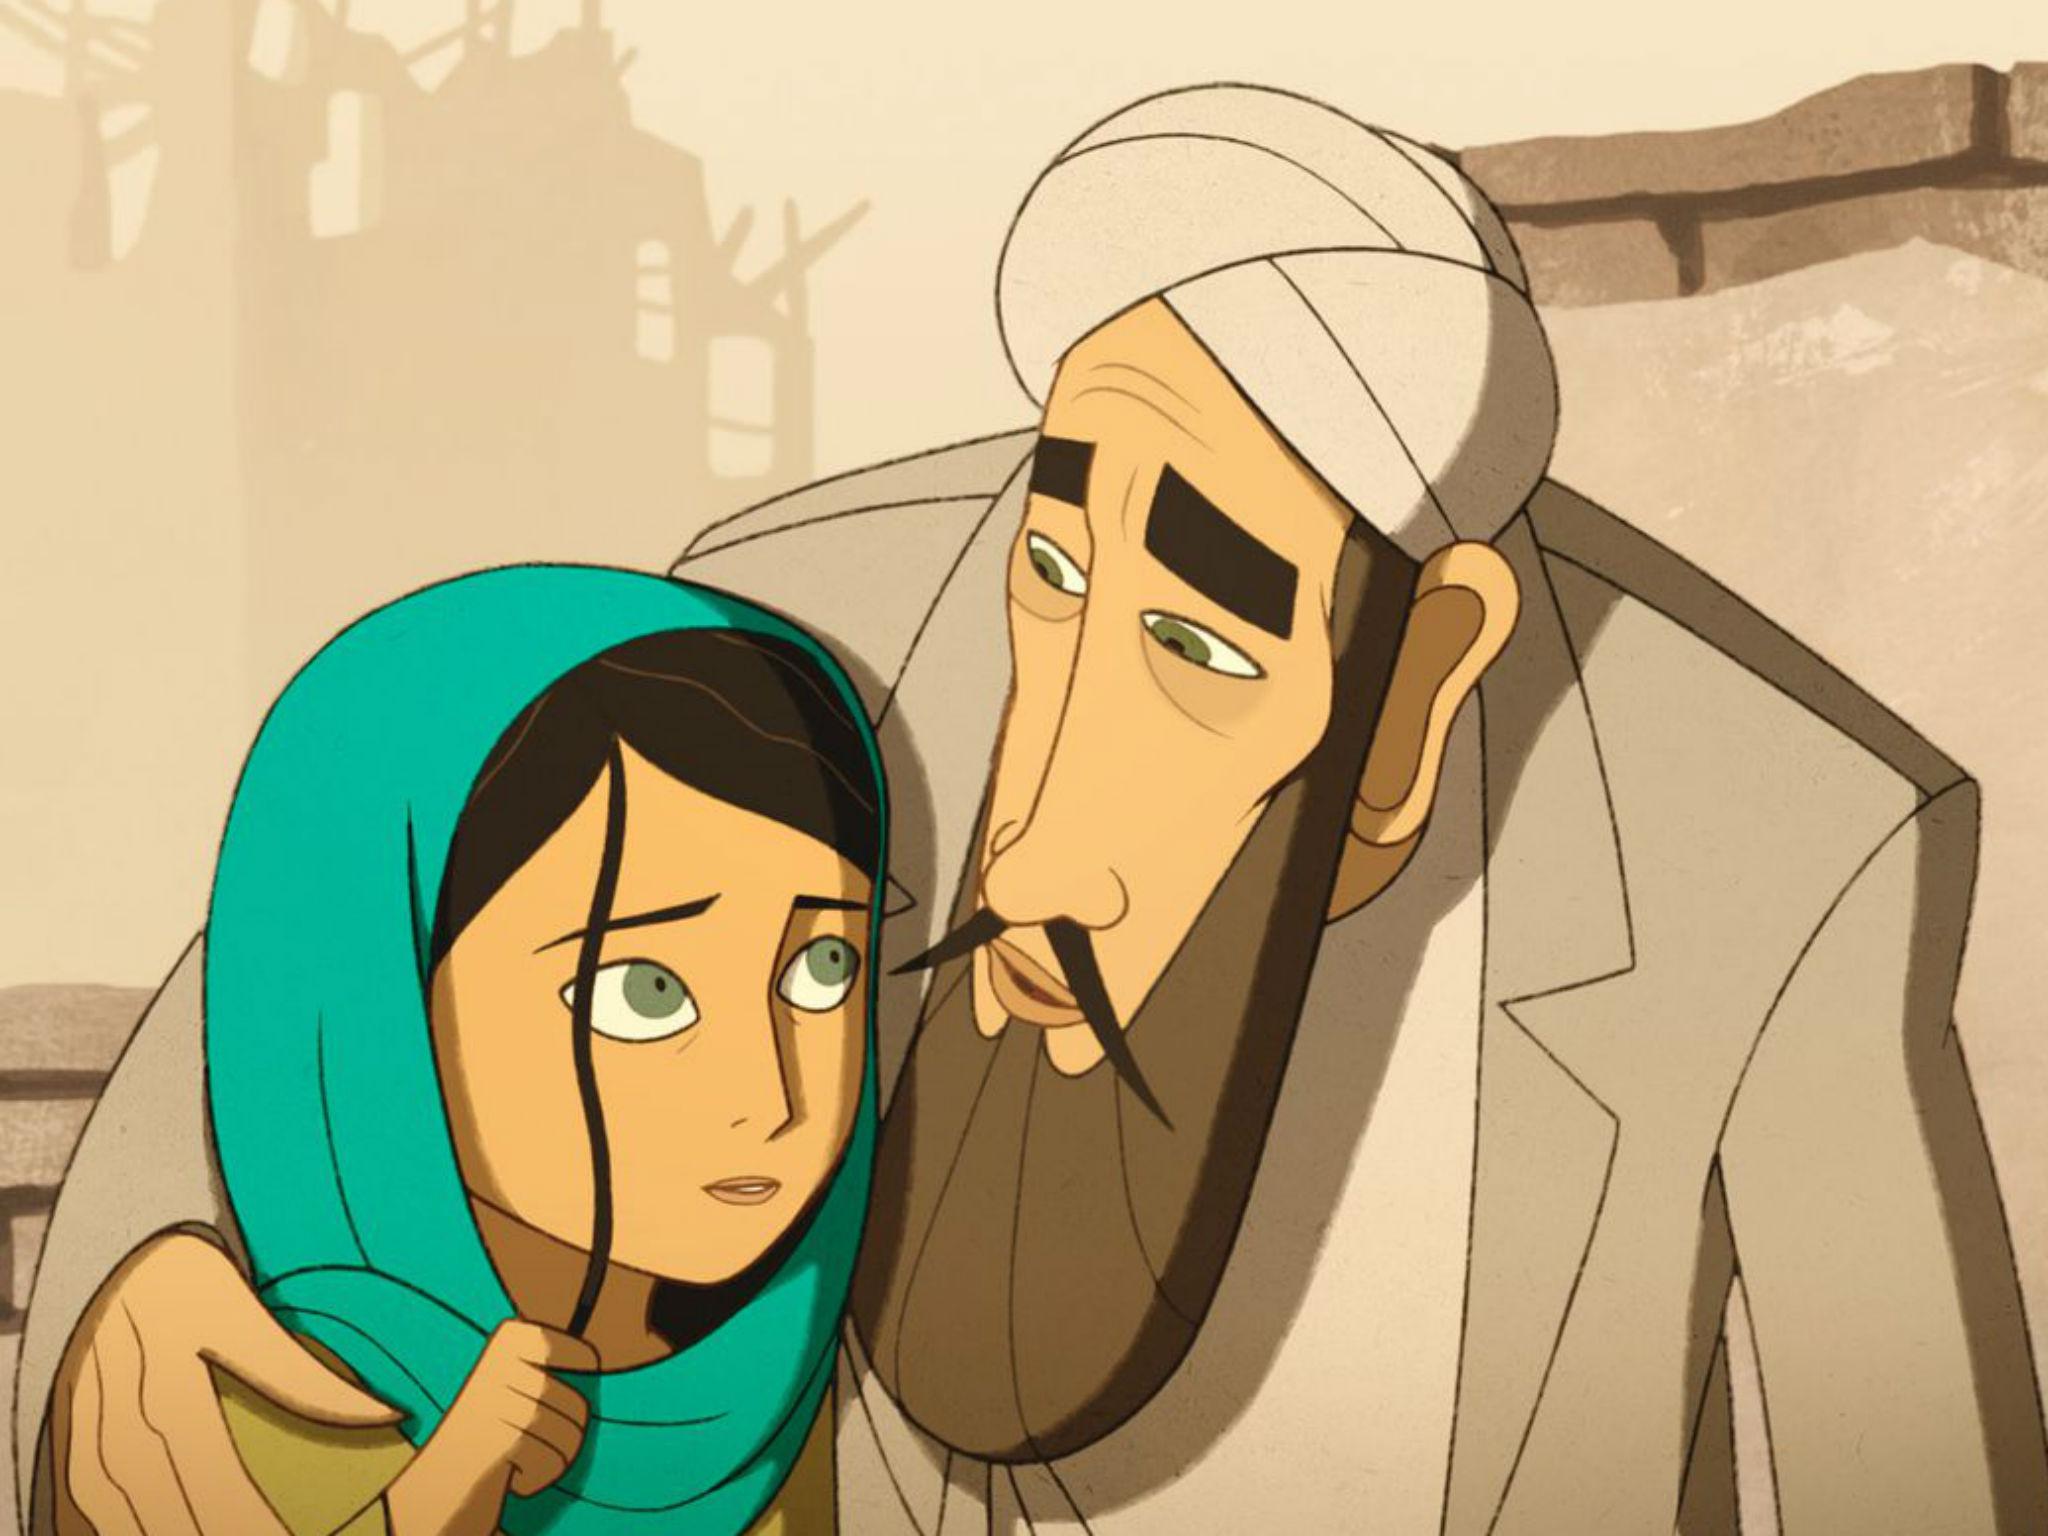 Badshar Sex Hd - The Breadwinner film review: Uplifting animation despite bleak premise |  The Independent | The Independent